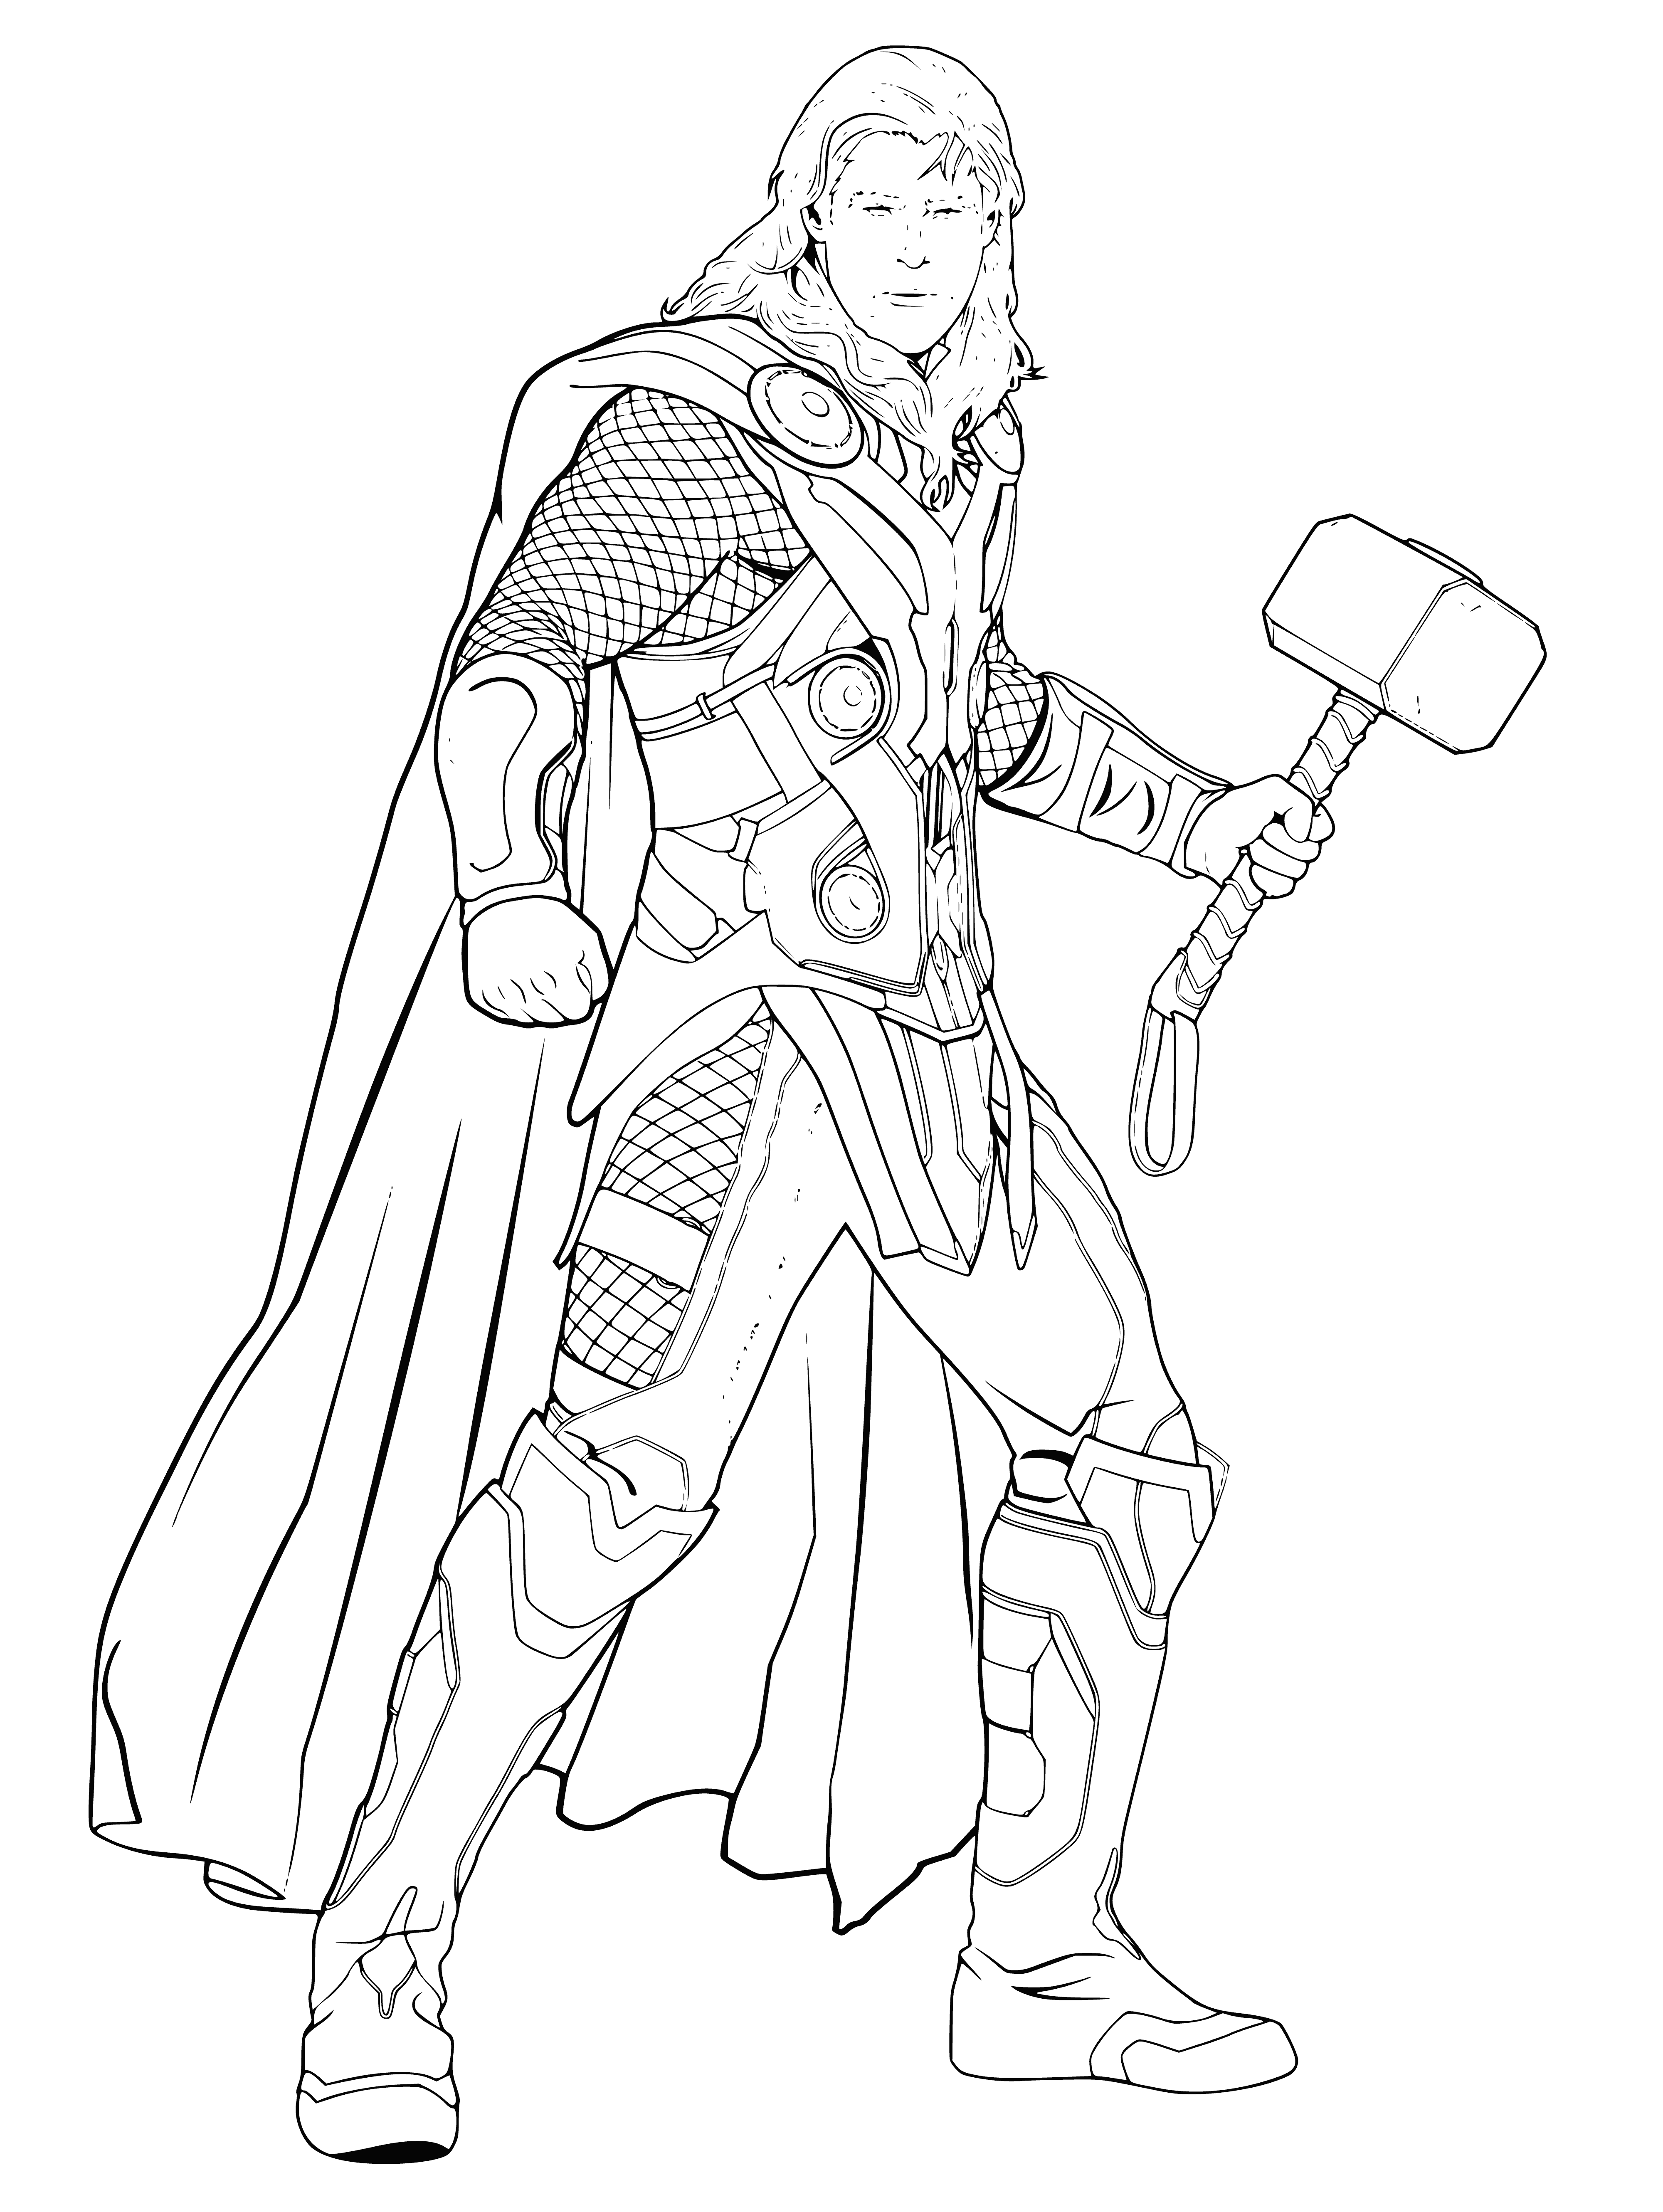 coloring page: Muscular man with long blonde hair, red cape, blue tunic & metal armor holding a large metal hammer.